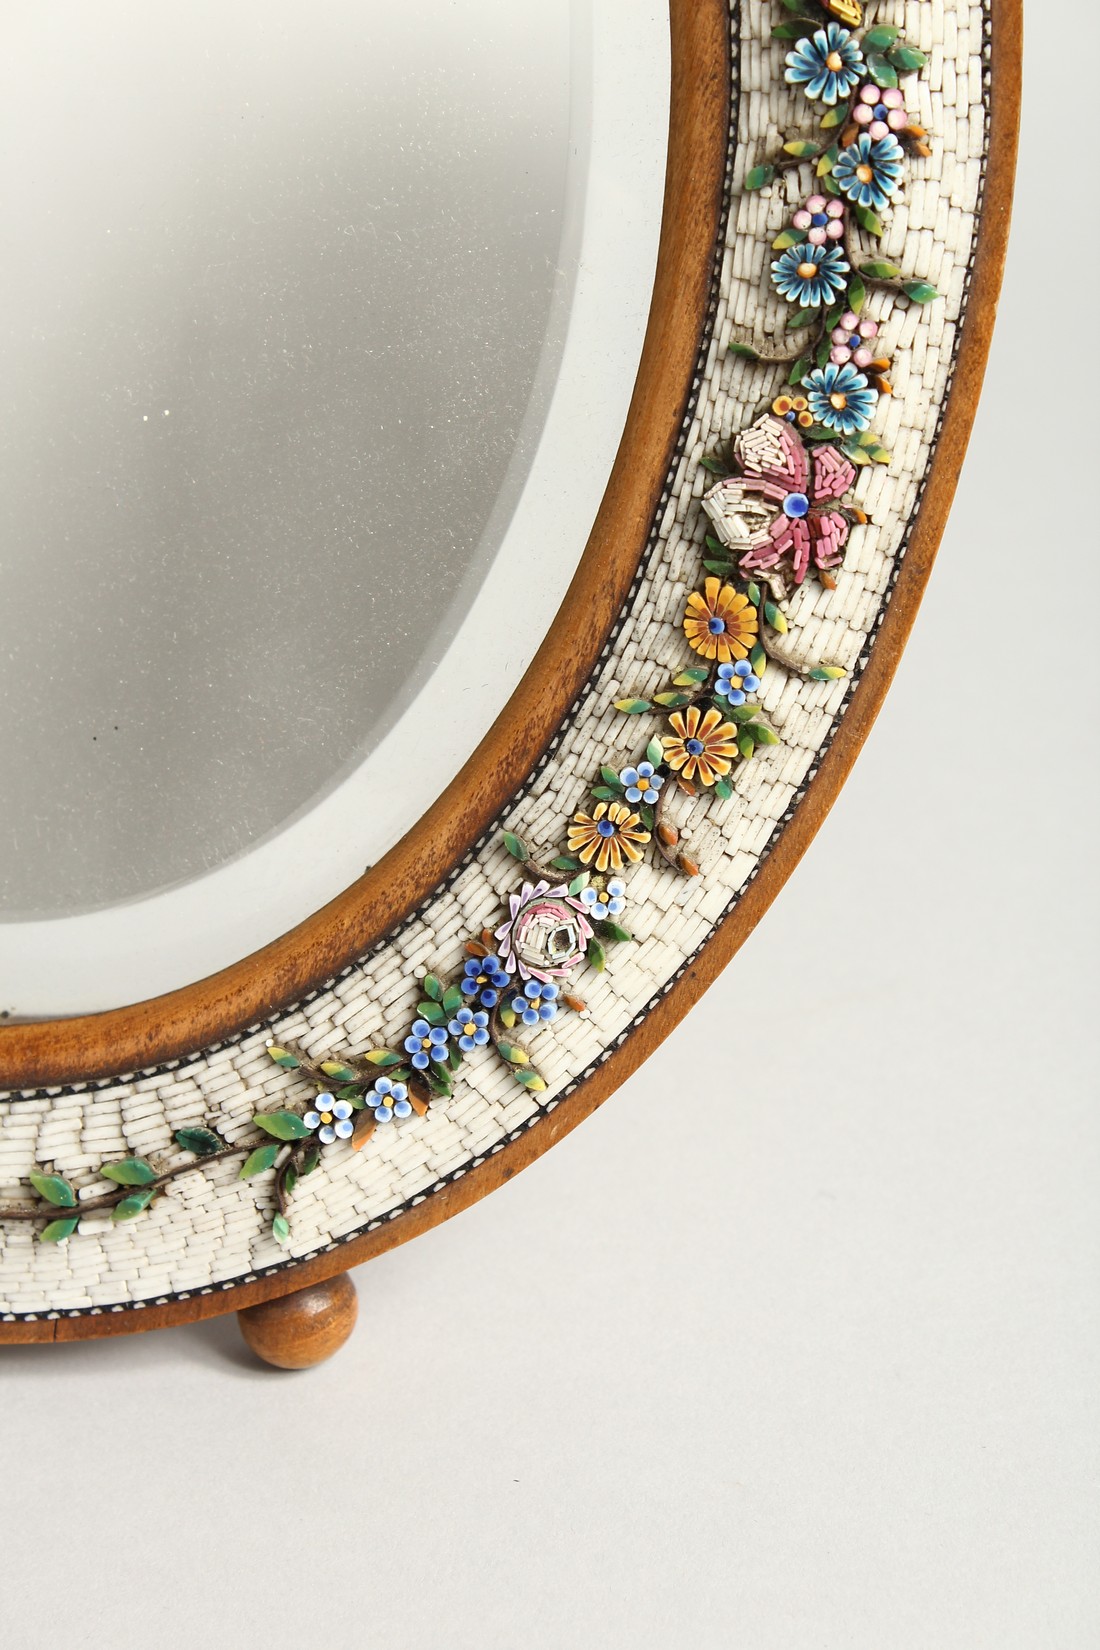 A GOOD MOSIAC FRAMED SHAPED EASEL MIRROR with a band of flowers 13.5ins high. - Image 5 of 8